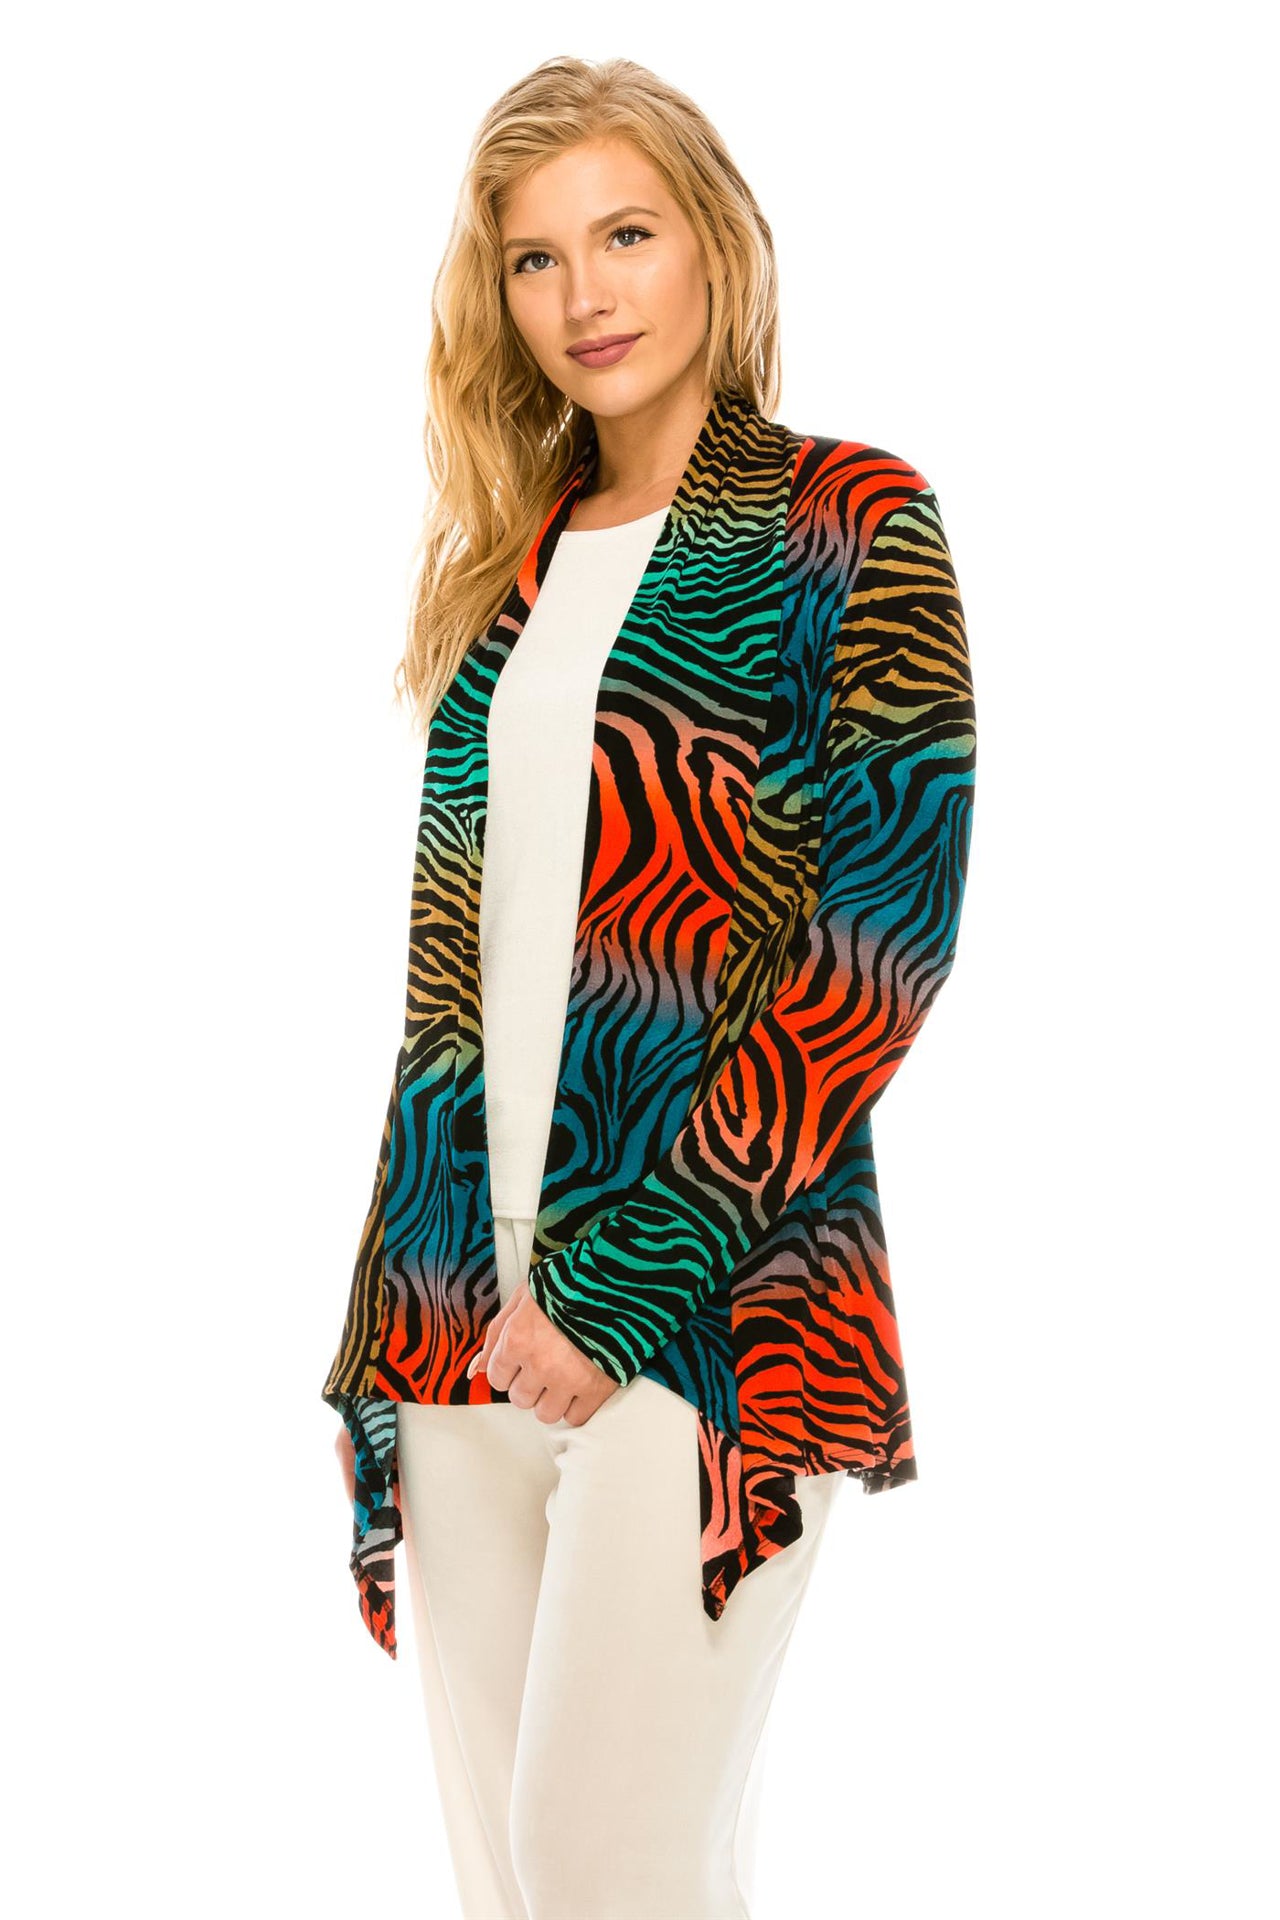 90% polyester / 10% spandex  You're not going to get more mileage out of a jacket than this one- so many colors to sync with! Try it with the matching pants 2 styles, one in rust and the other in teal!  Made in USA